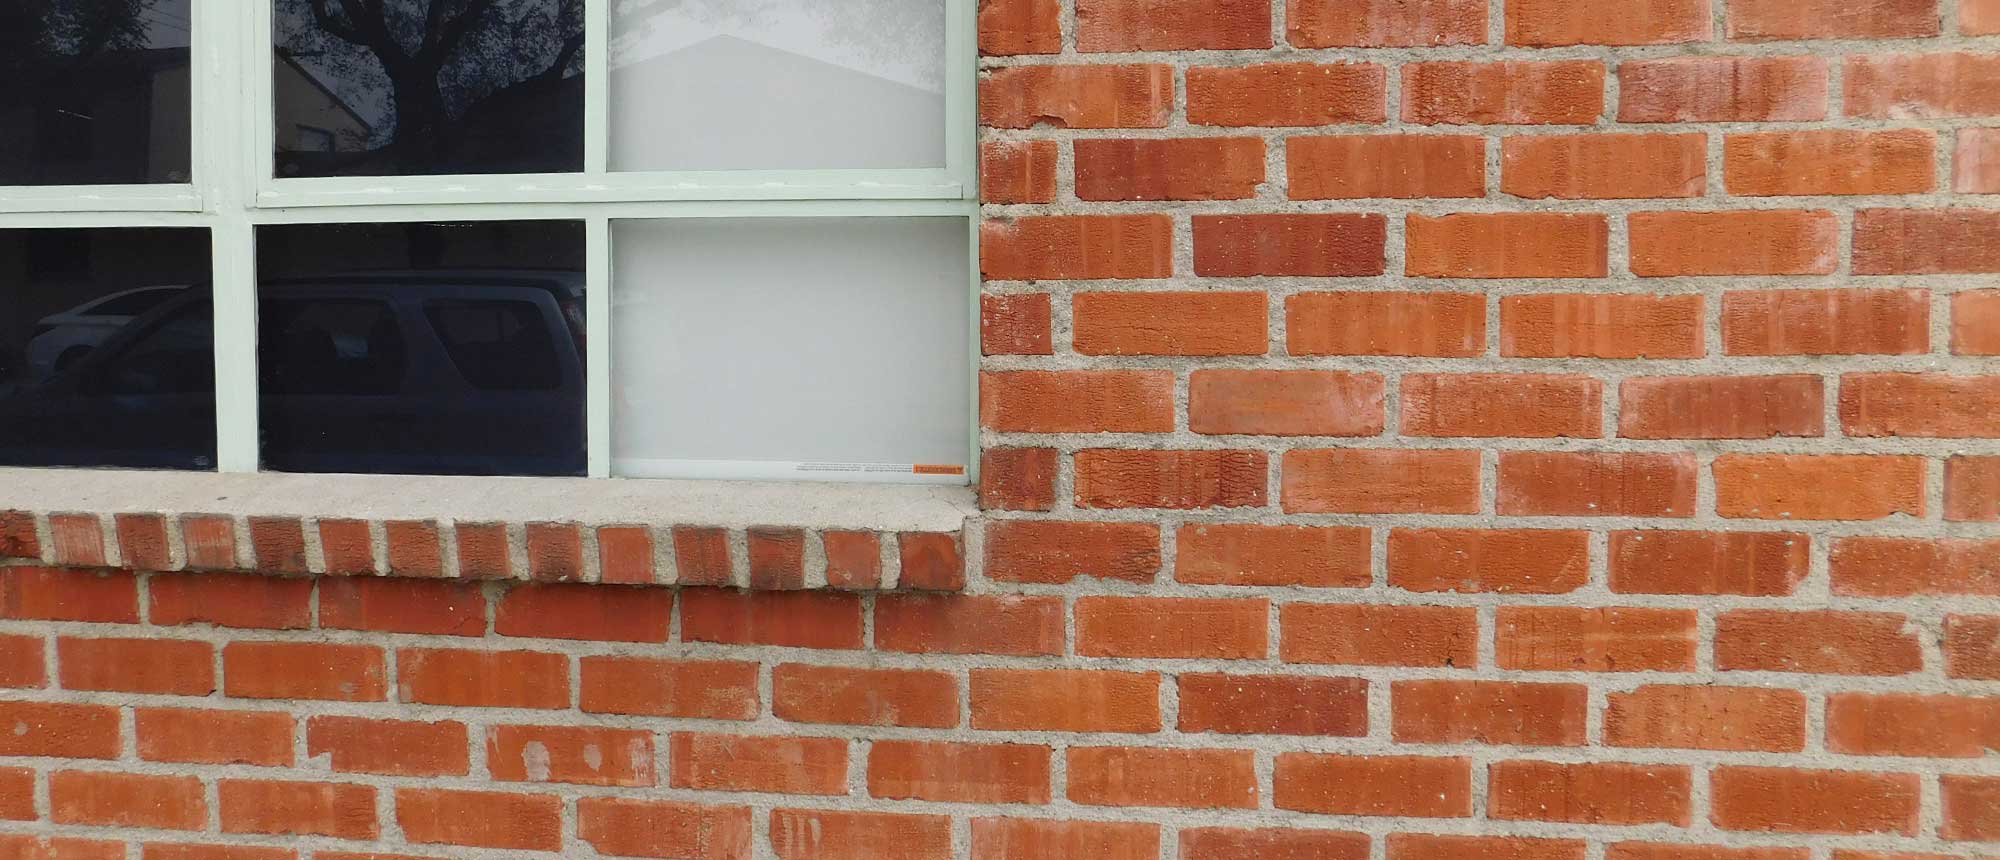 A brick wall and window of a building 